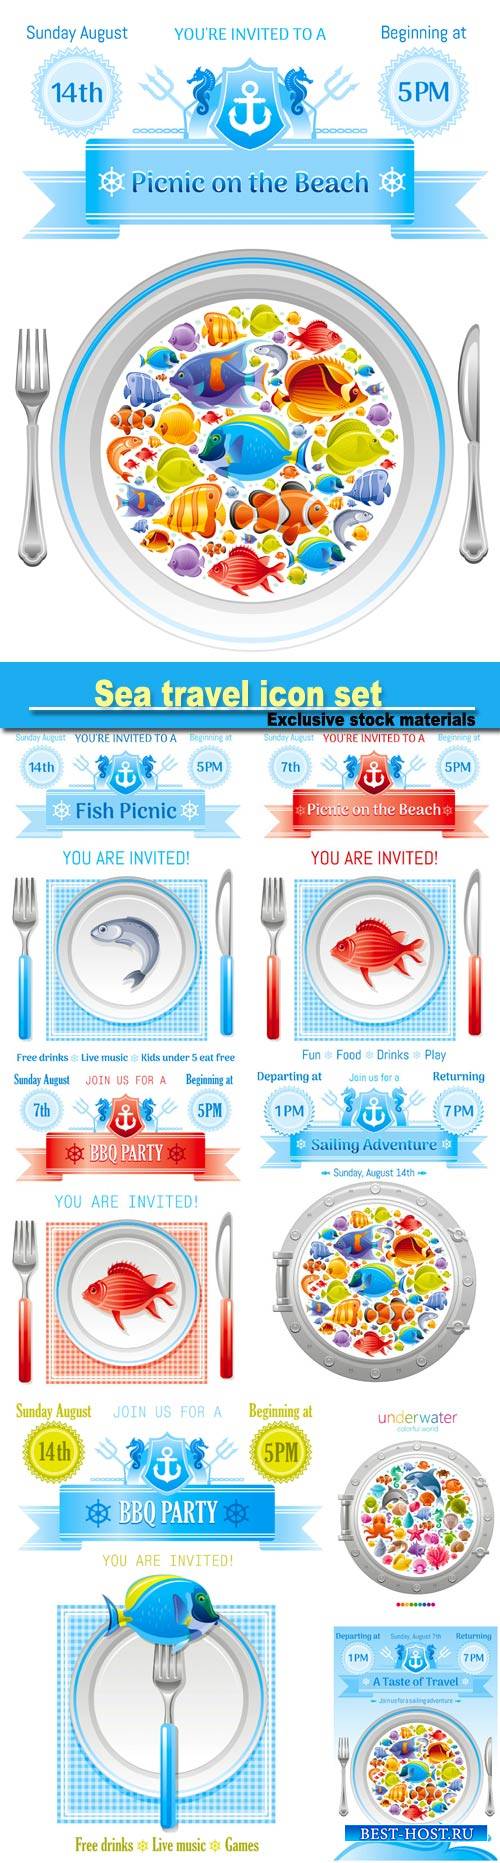 Sea travel icon set with underwater diving animals, dolphin, killer whale,  ...